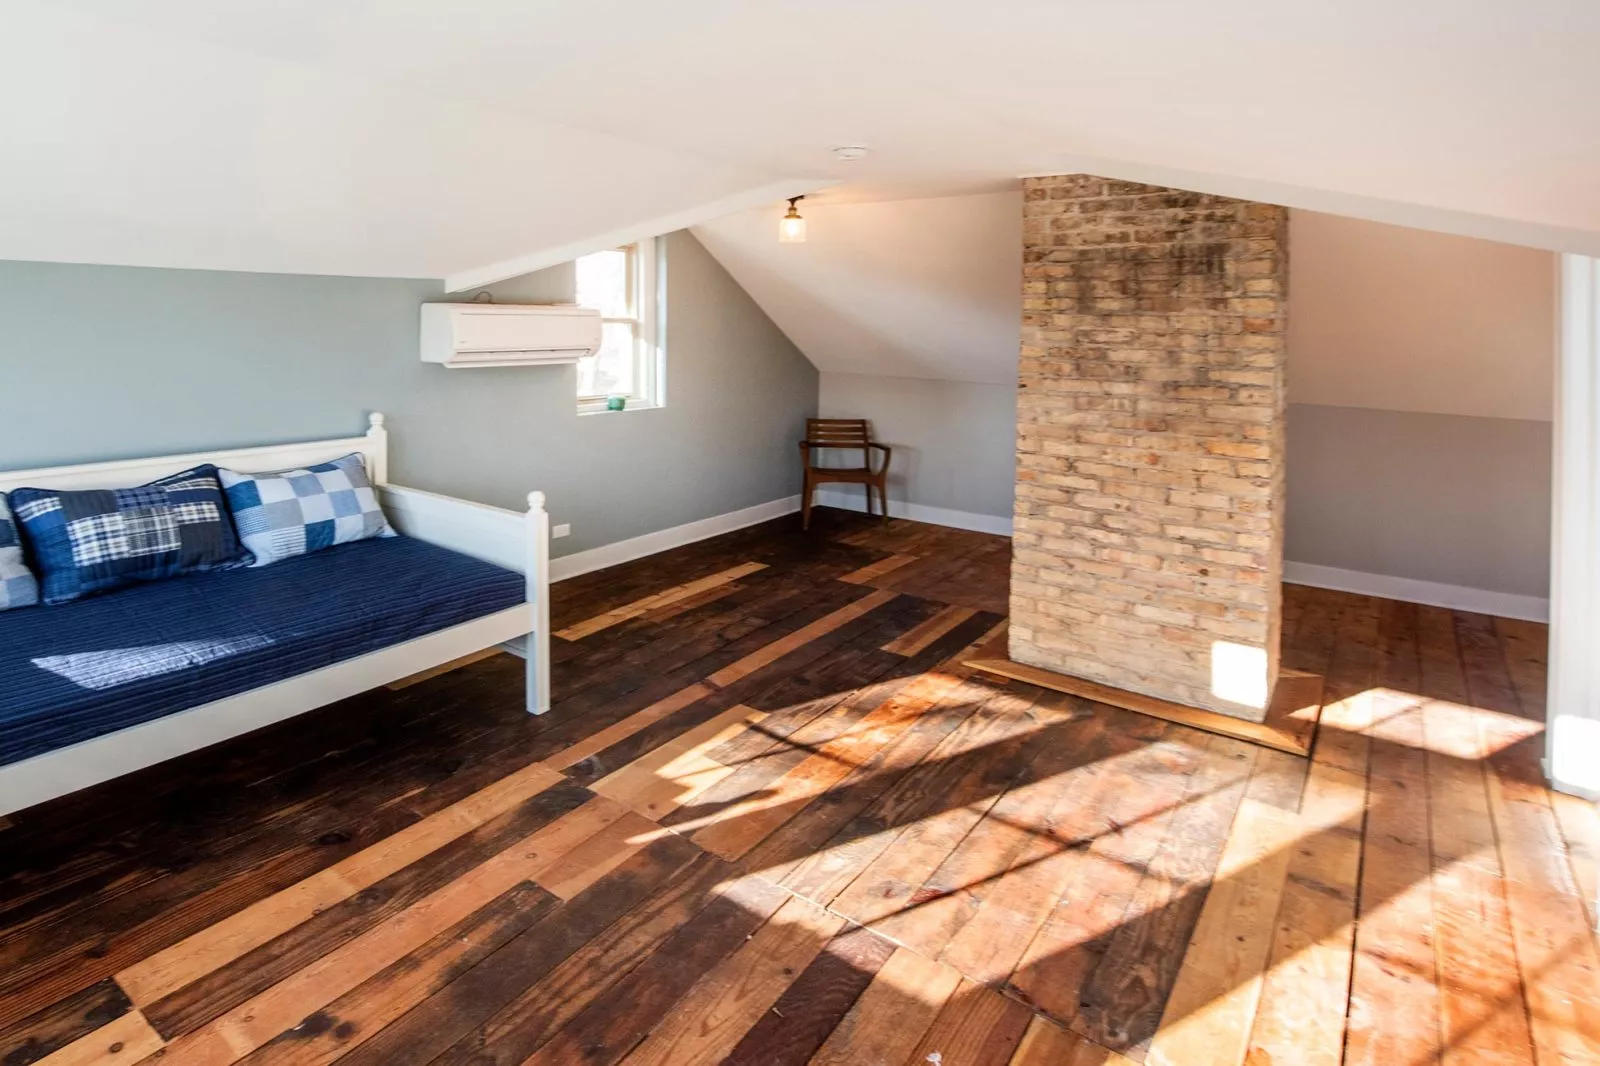 Updated second-story bonus space with multi-toned wood flooring, original brick chimney, & daybed